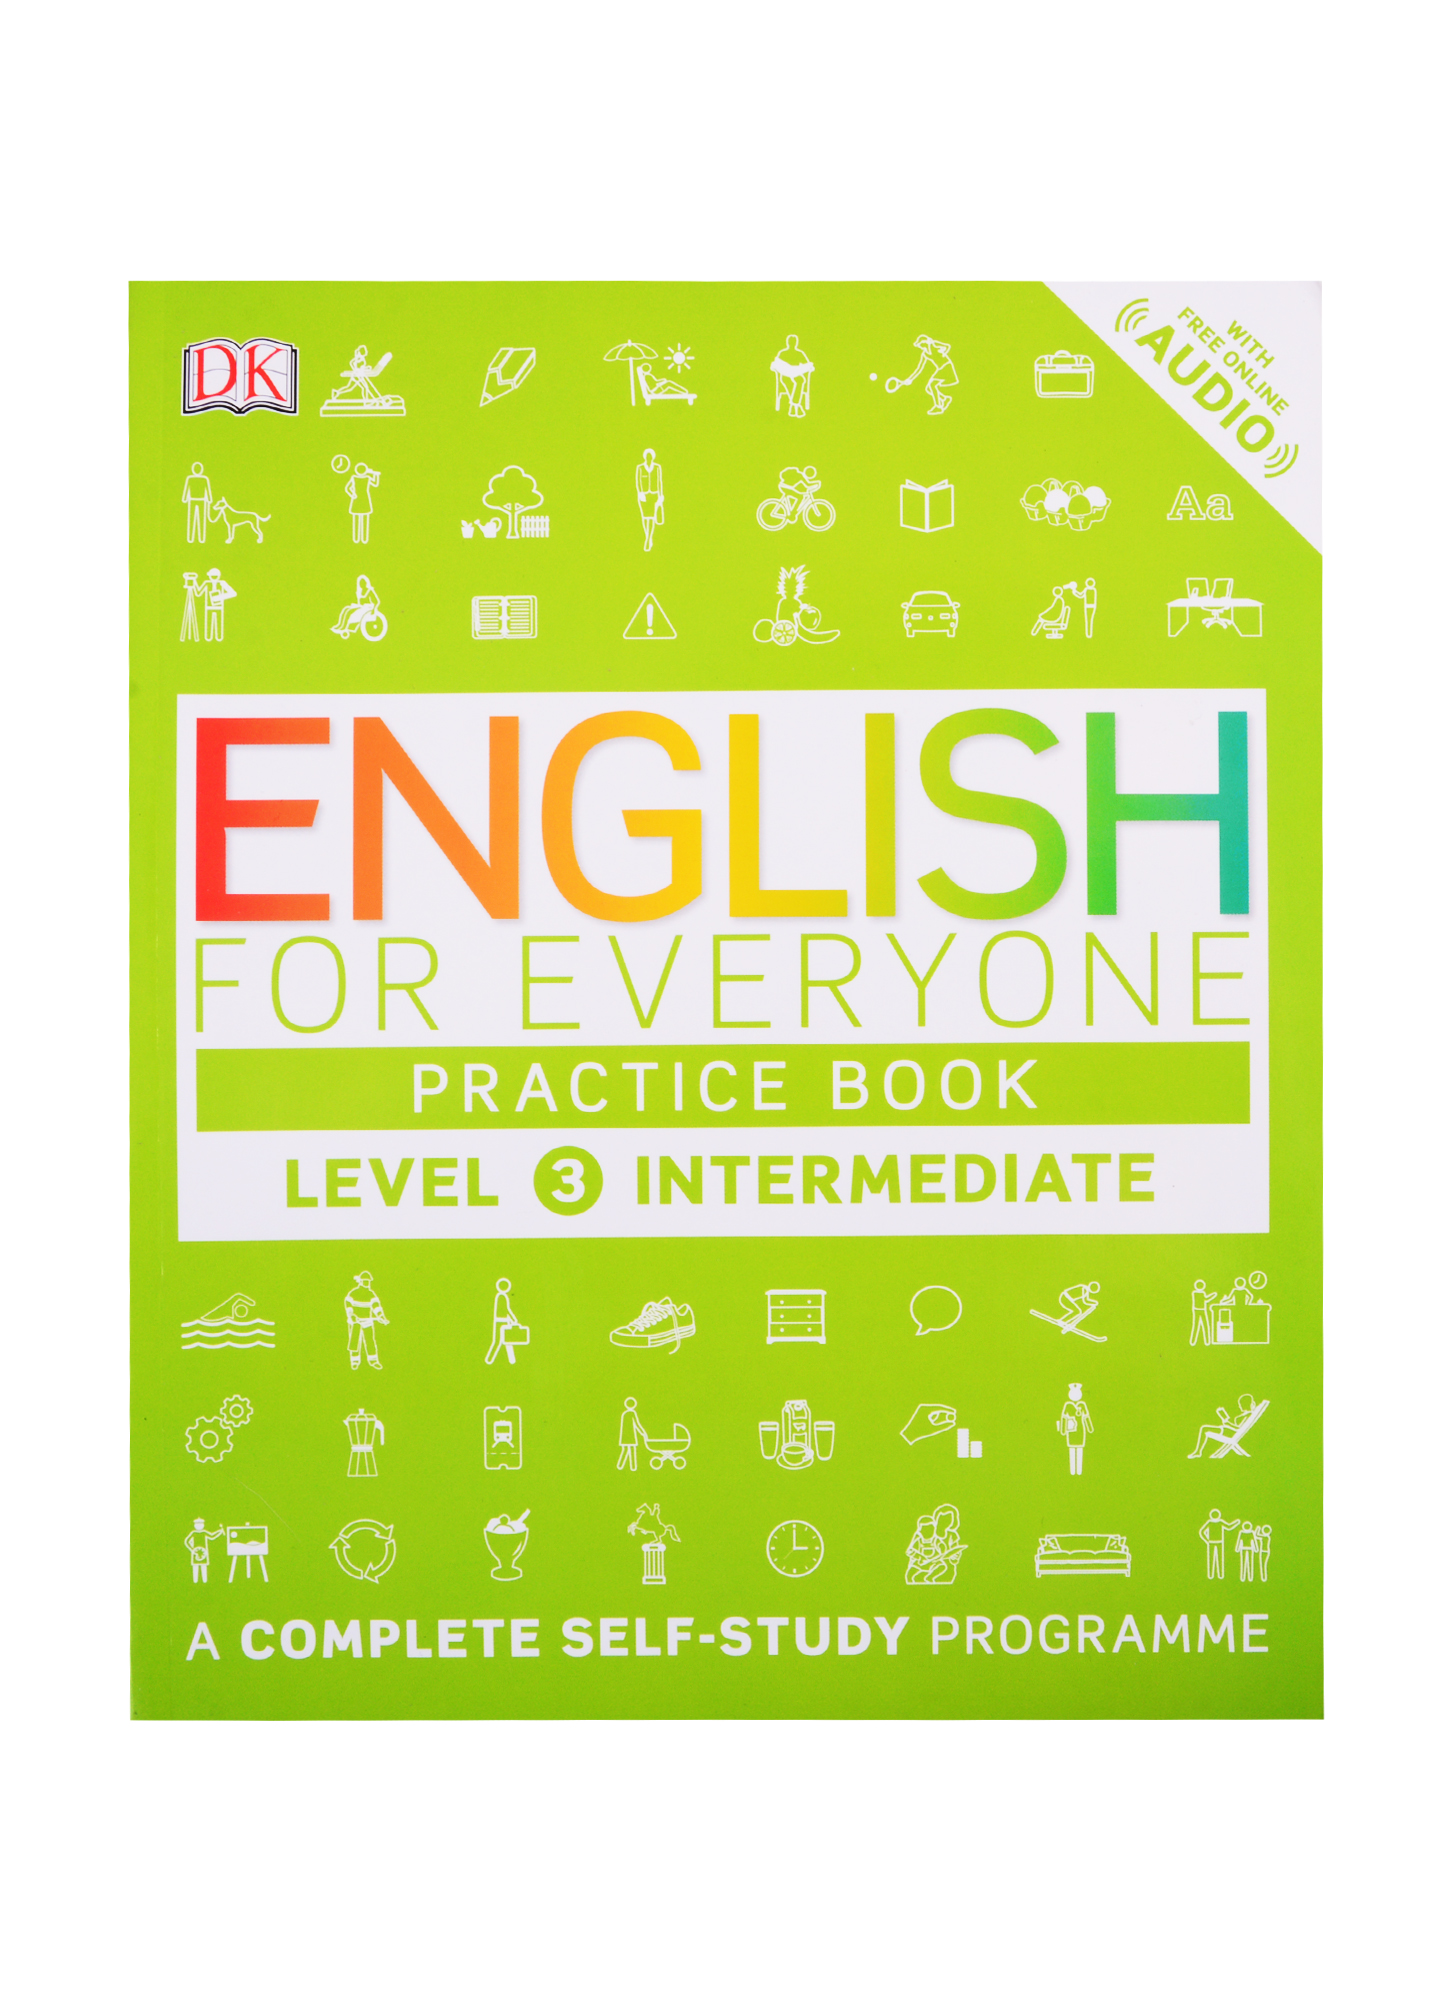 English for Everyone Practice Book Level 3 Intermediate english for everyone teachers guide